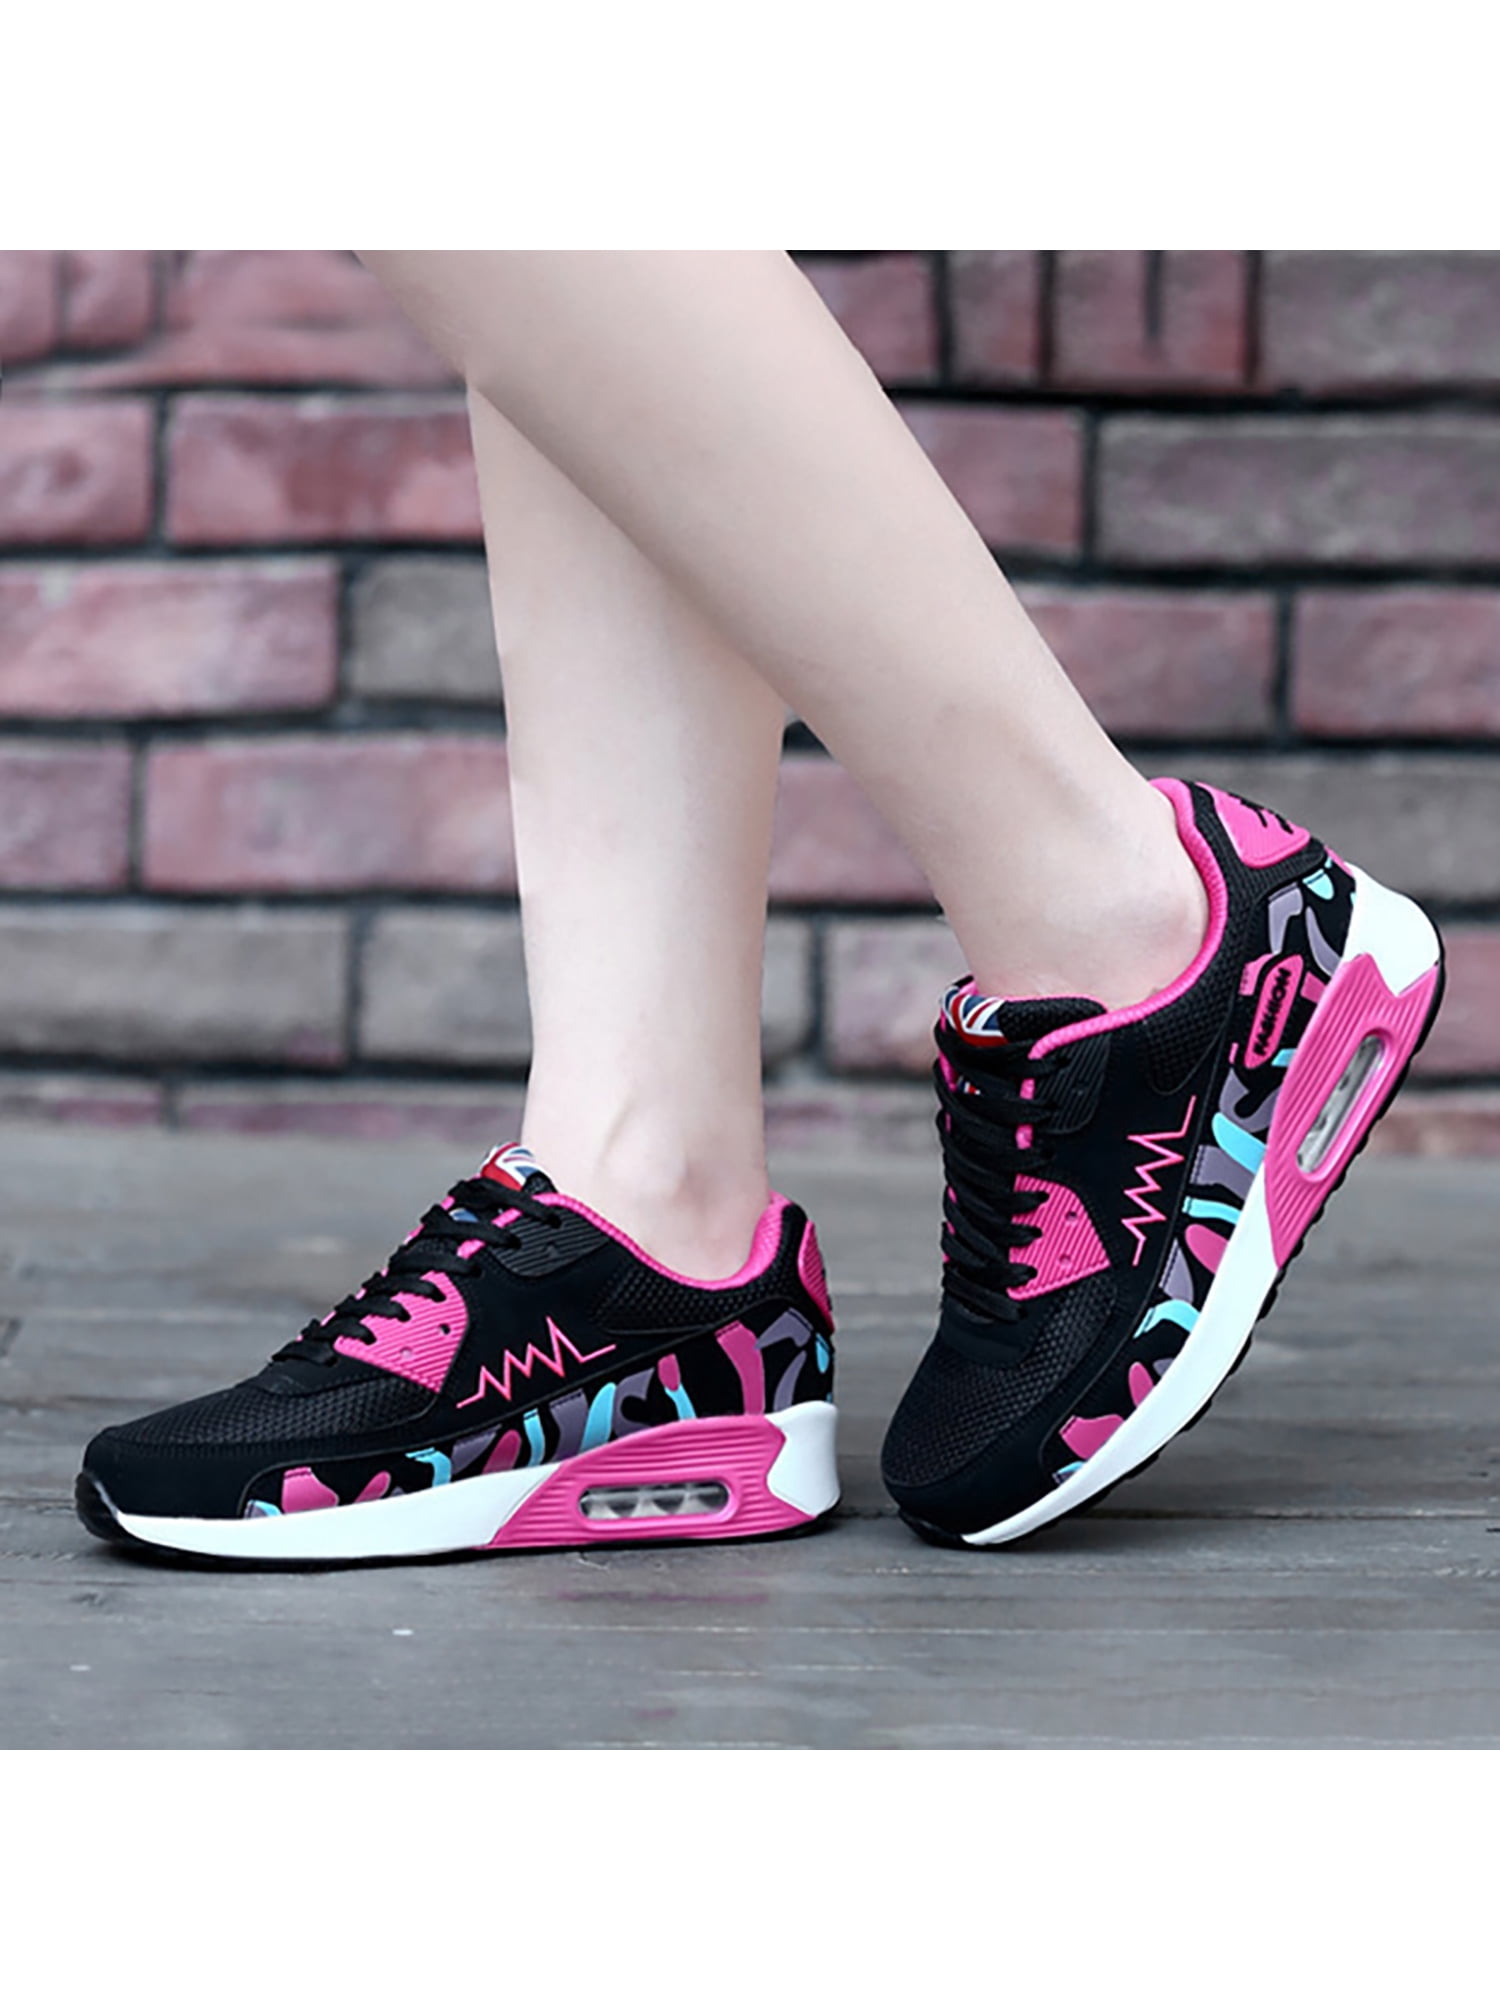 Women Air Athletic Running Shoes Air Cushion Shoes for Womens Mesh Sneakers Fashion Tennis Breathable Walking Gym Work Shoes